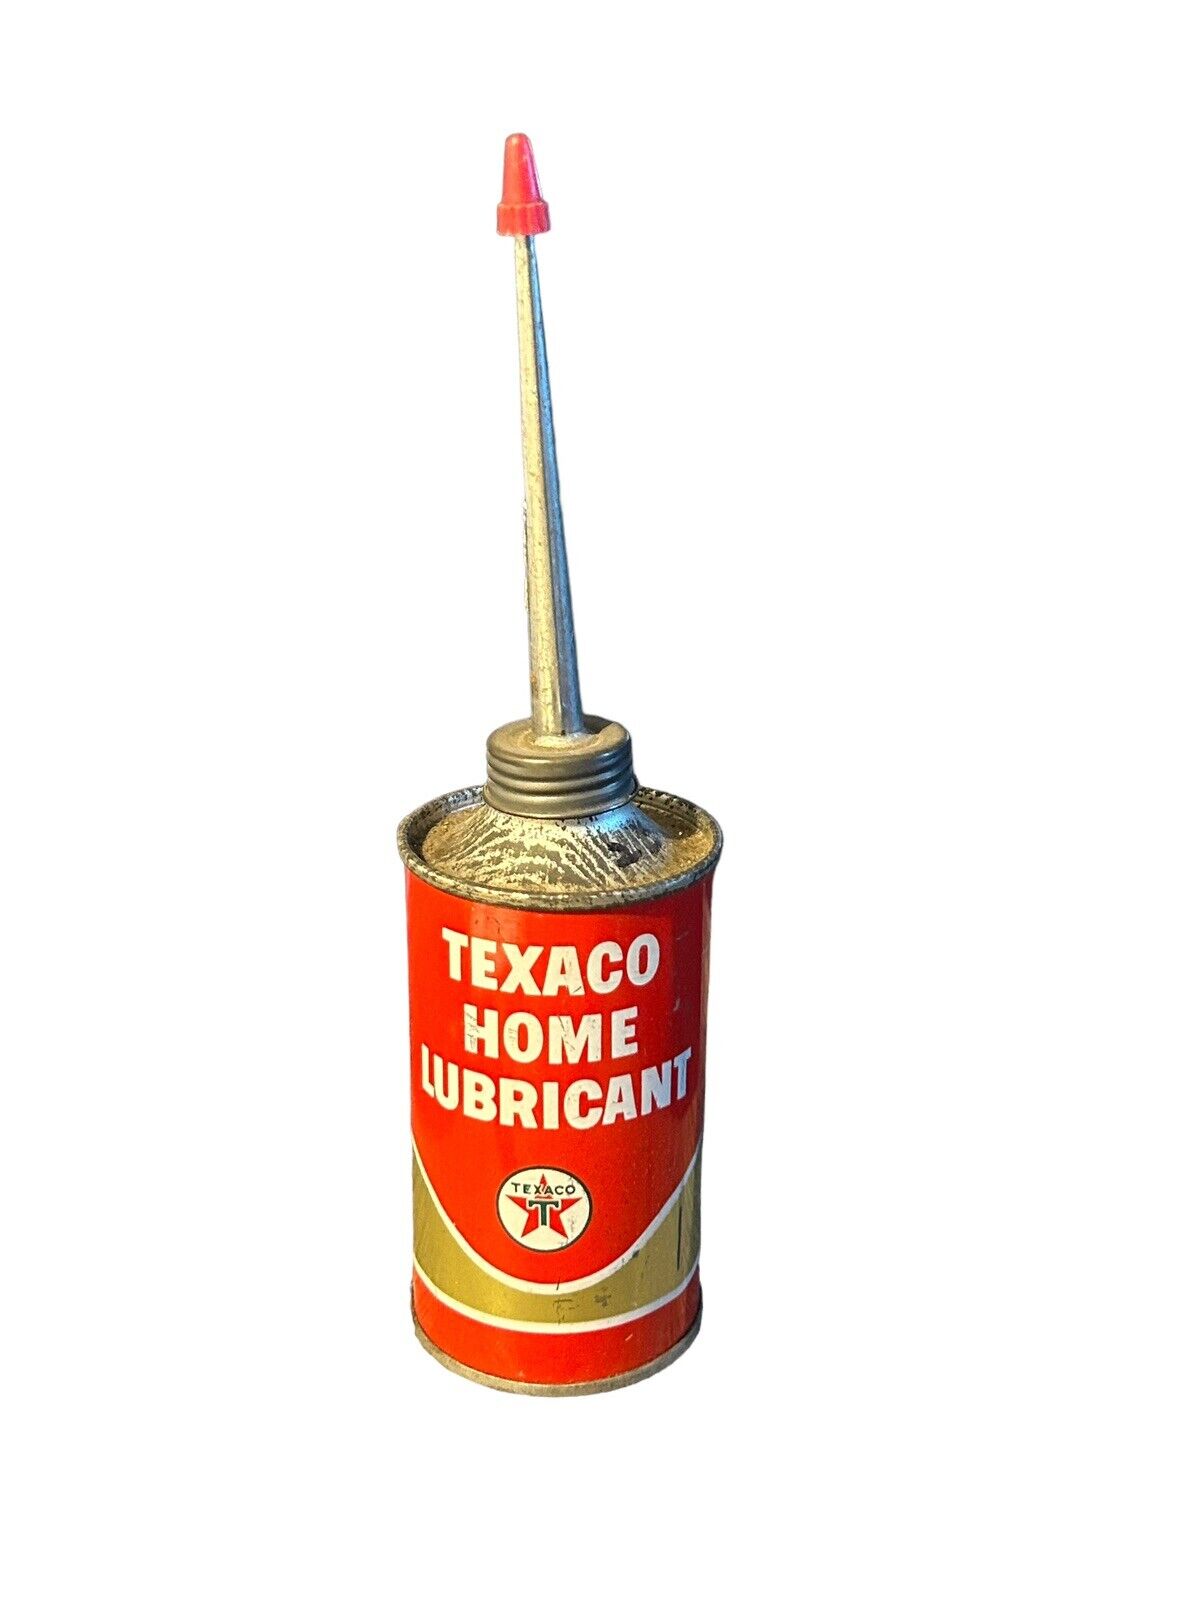 Vintage 1950’s Texaco Home Lubricant 3oz oil can